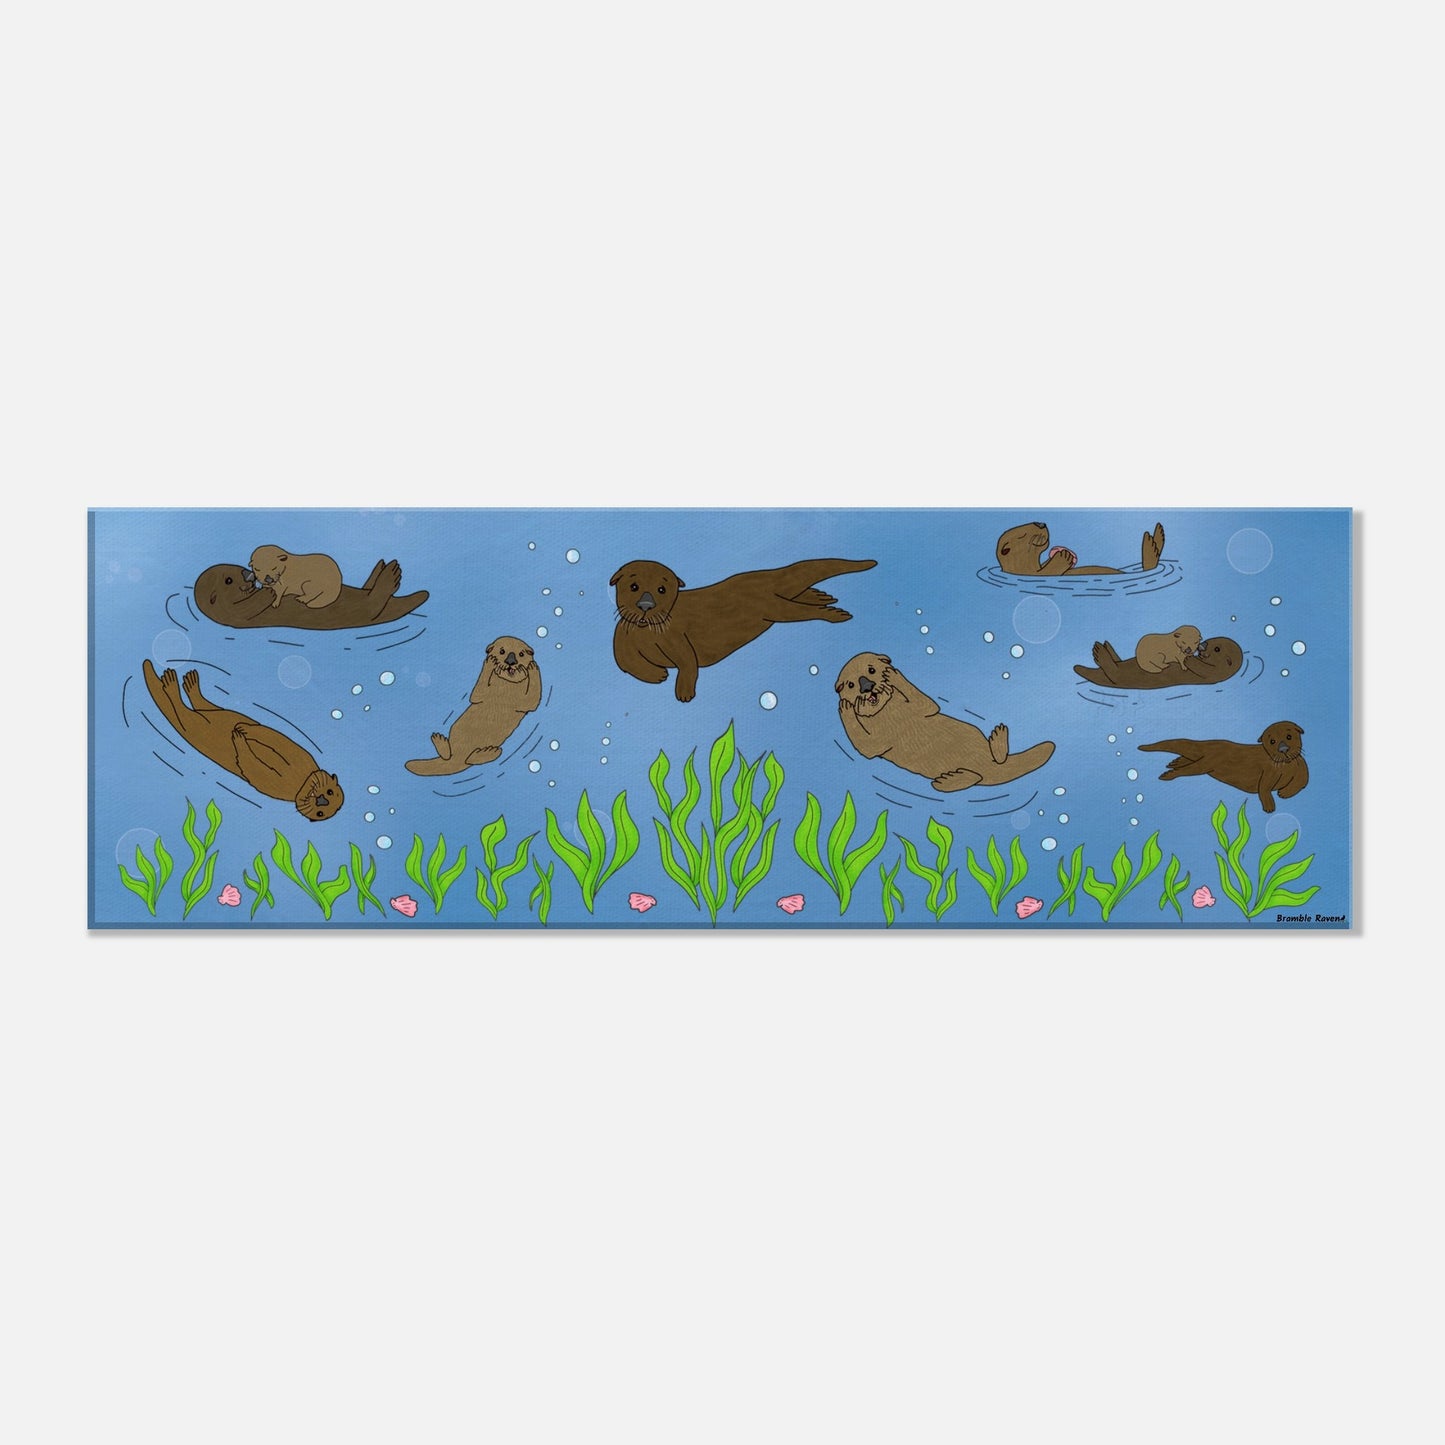 8 by 24 inch slim canvas wall art print of sea otters swimming along the seabed. Hanging hardware included for easy installation.